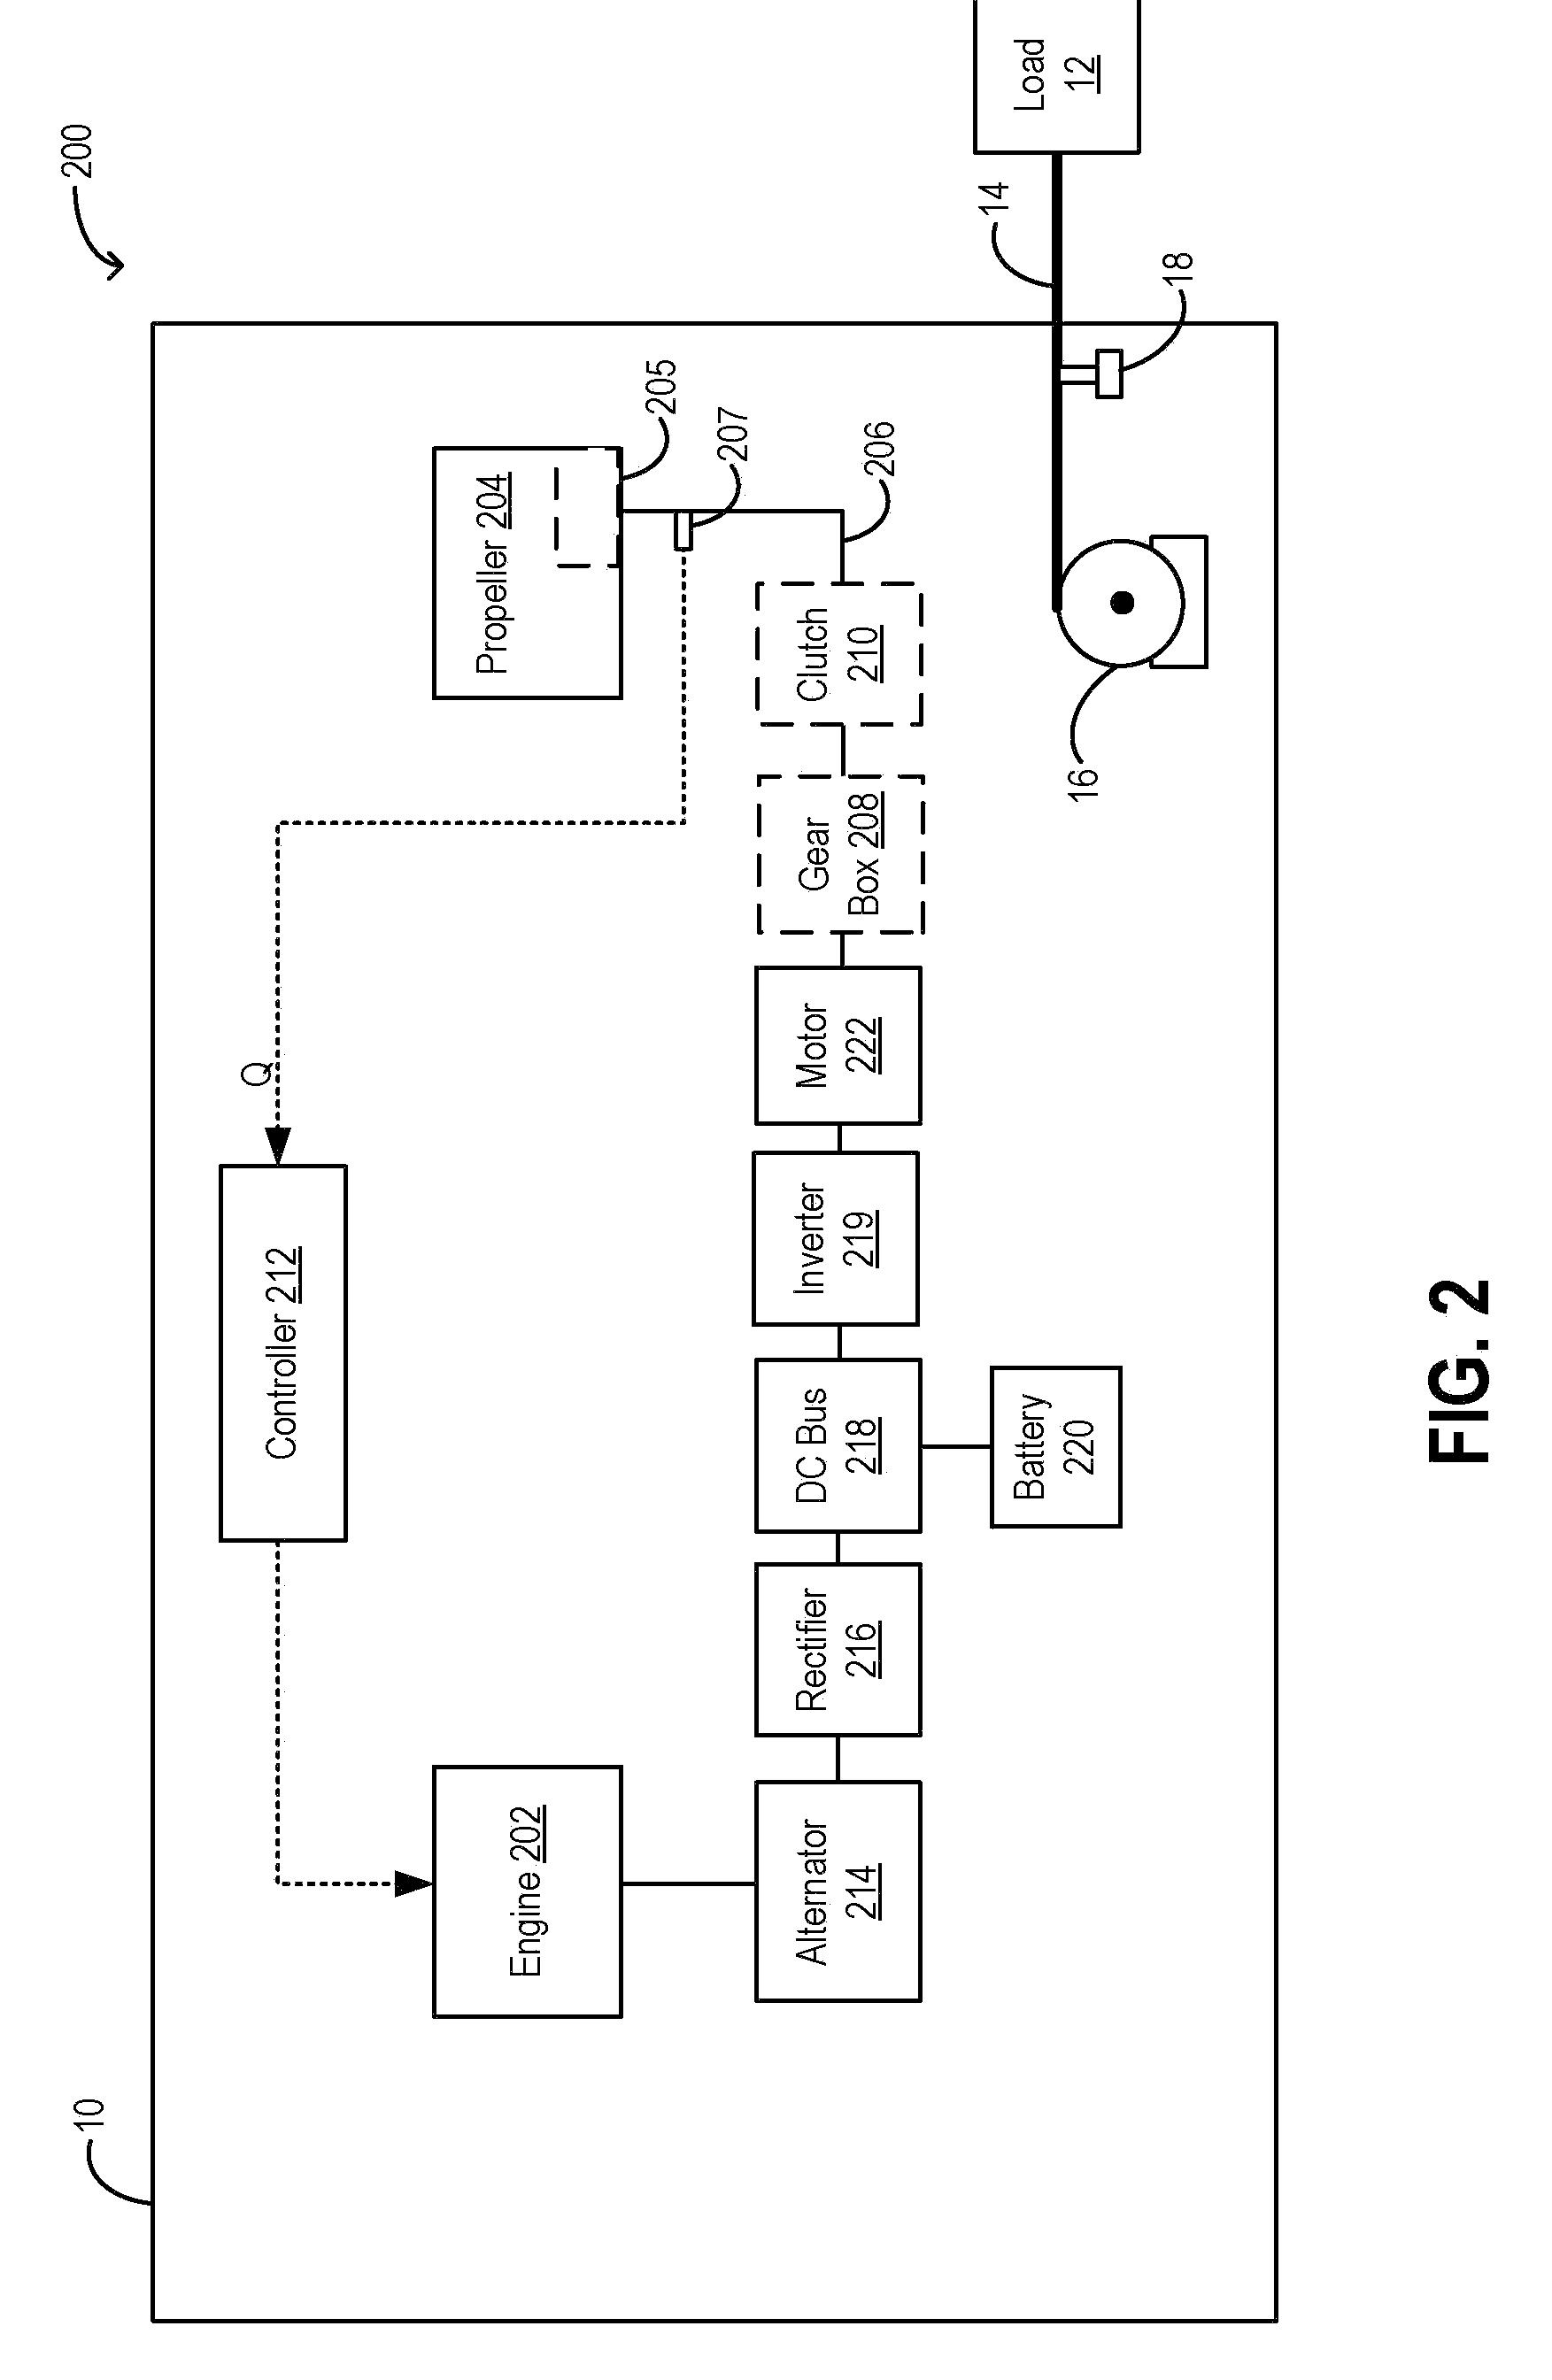 Method and system for controlling propulsion systems